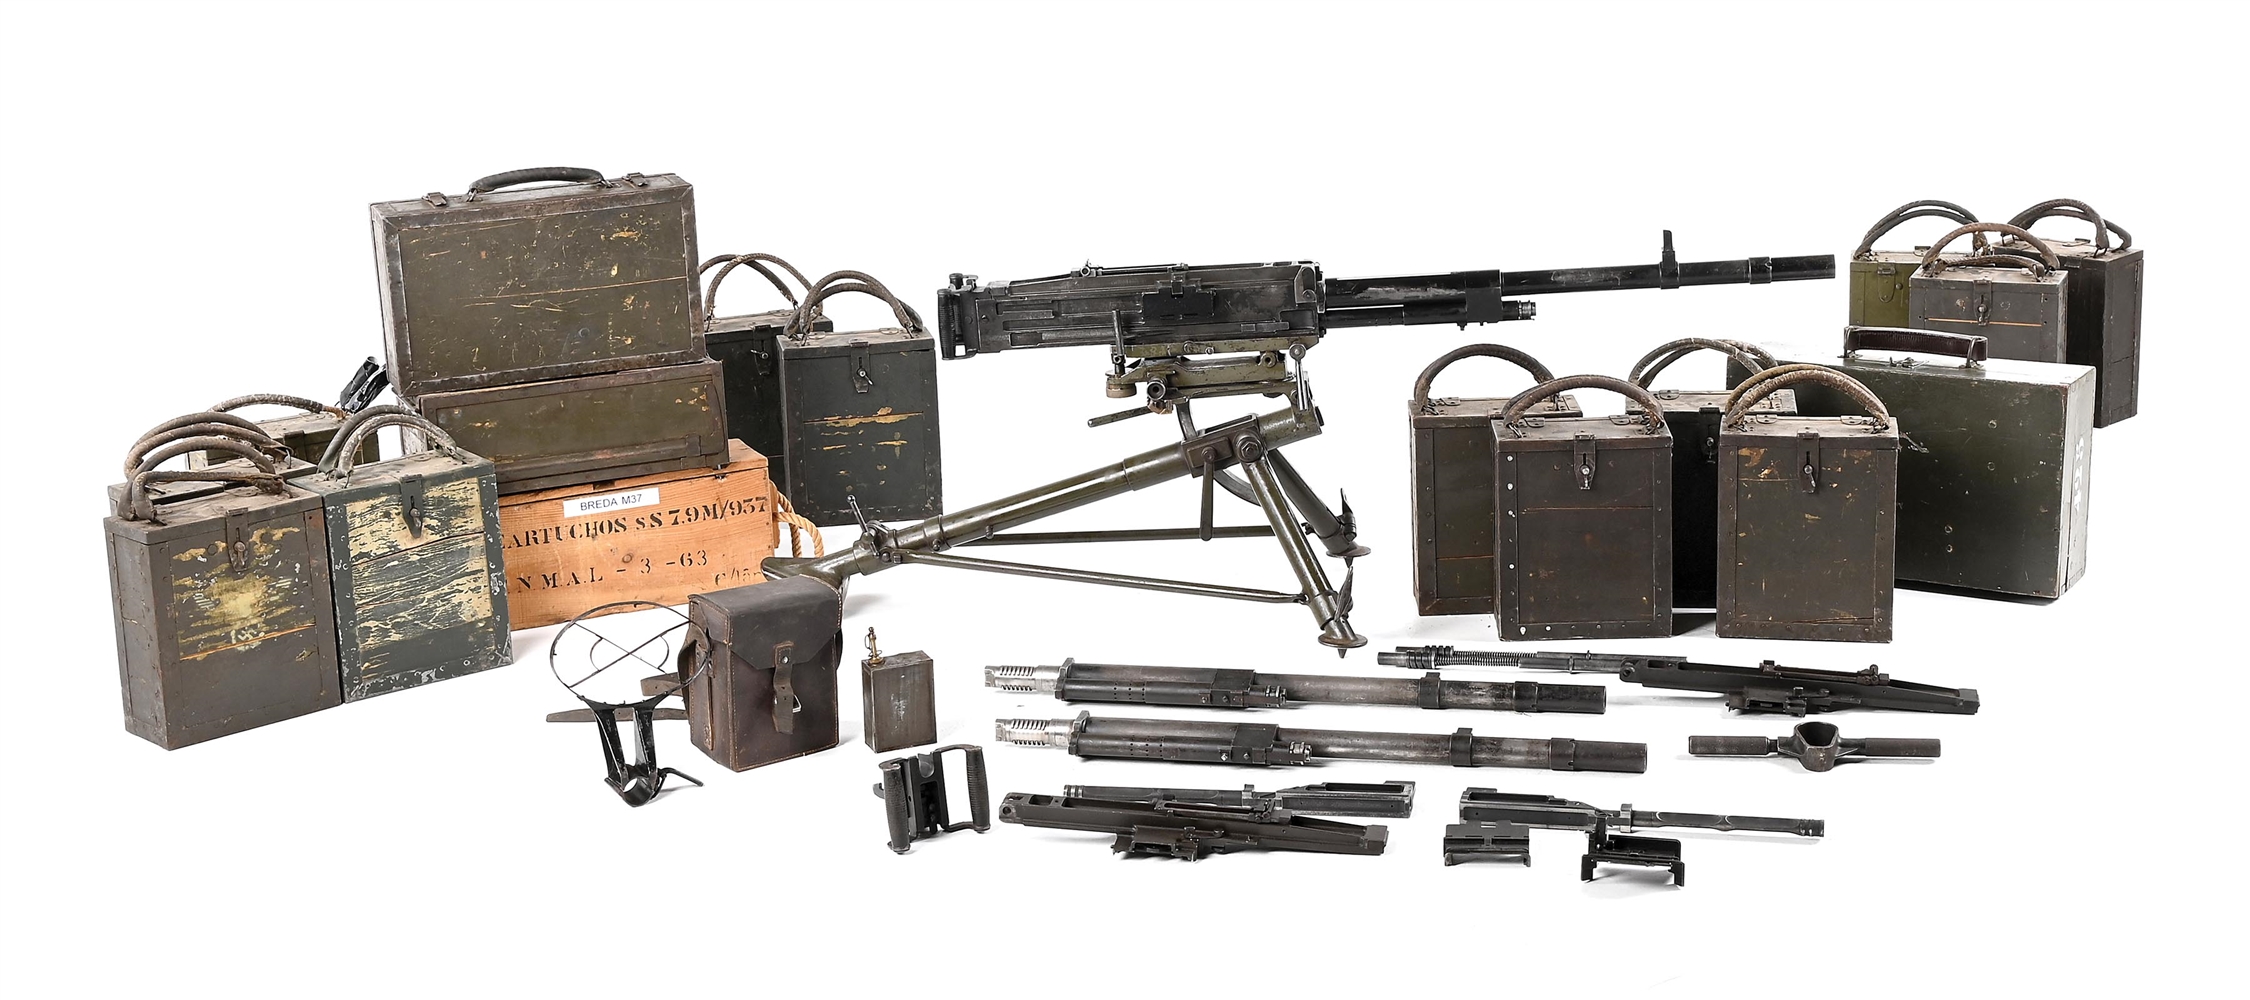 (N) VERY DESIRABLE AND SCARCE FULLY TRANSFERABLE ORIGINAL ITALIAN WWII BREDA MODEL 37 HEAVY MACHINE GUN WITH NUMEROUS ACCESSORIES (CURIO AND RELIC).